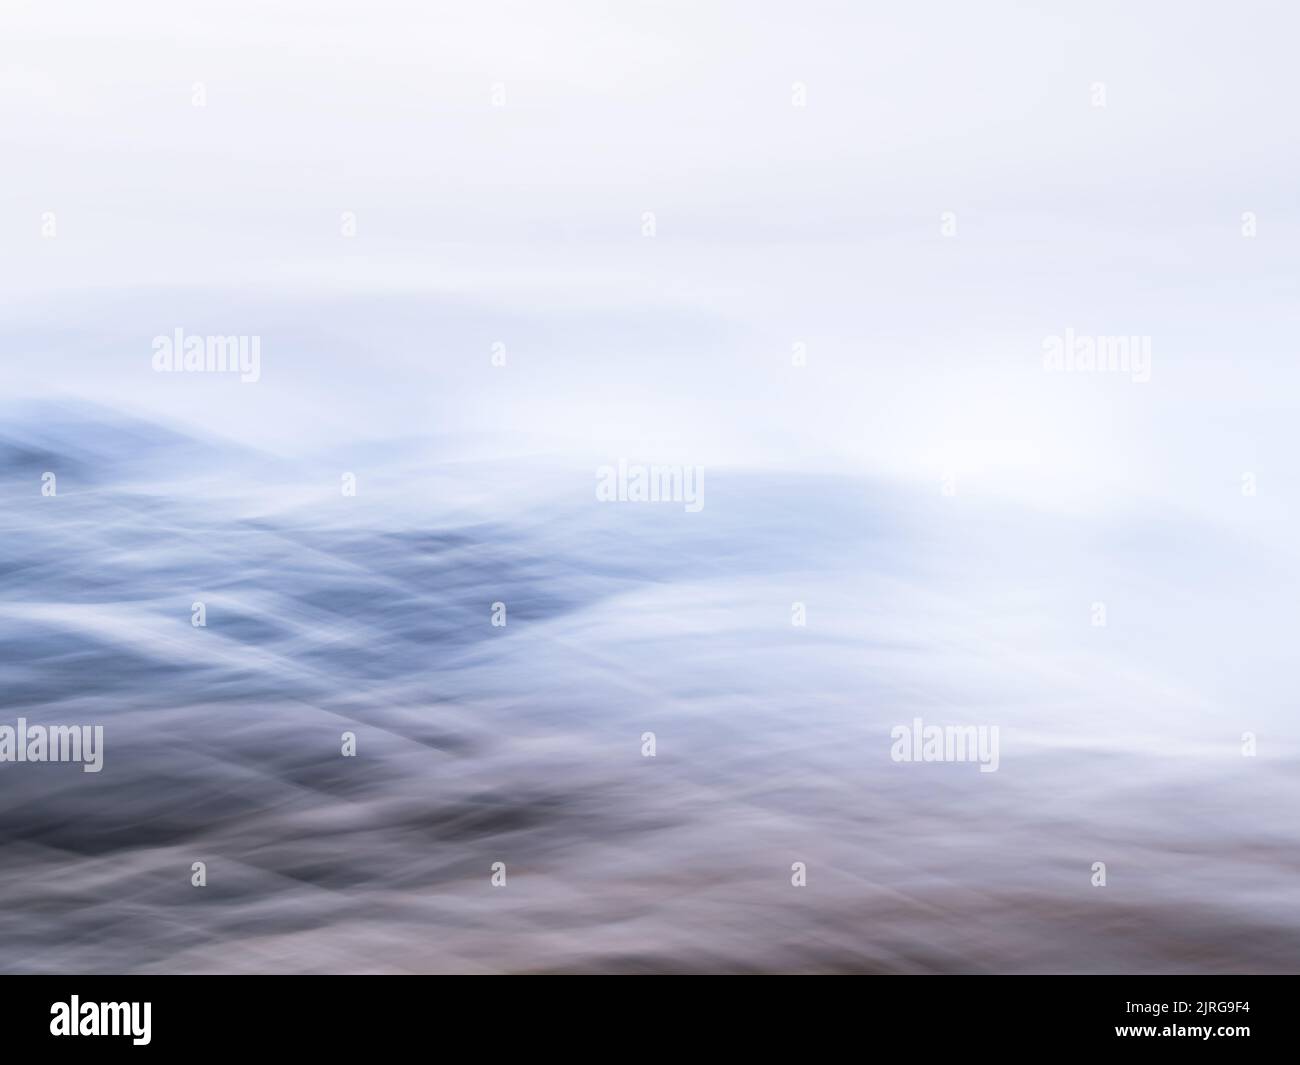 Impressionist waves abstract background. Light and airy. Stock Photo